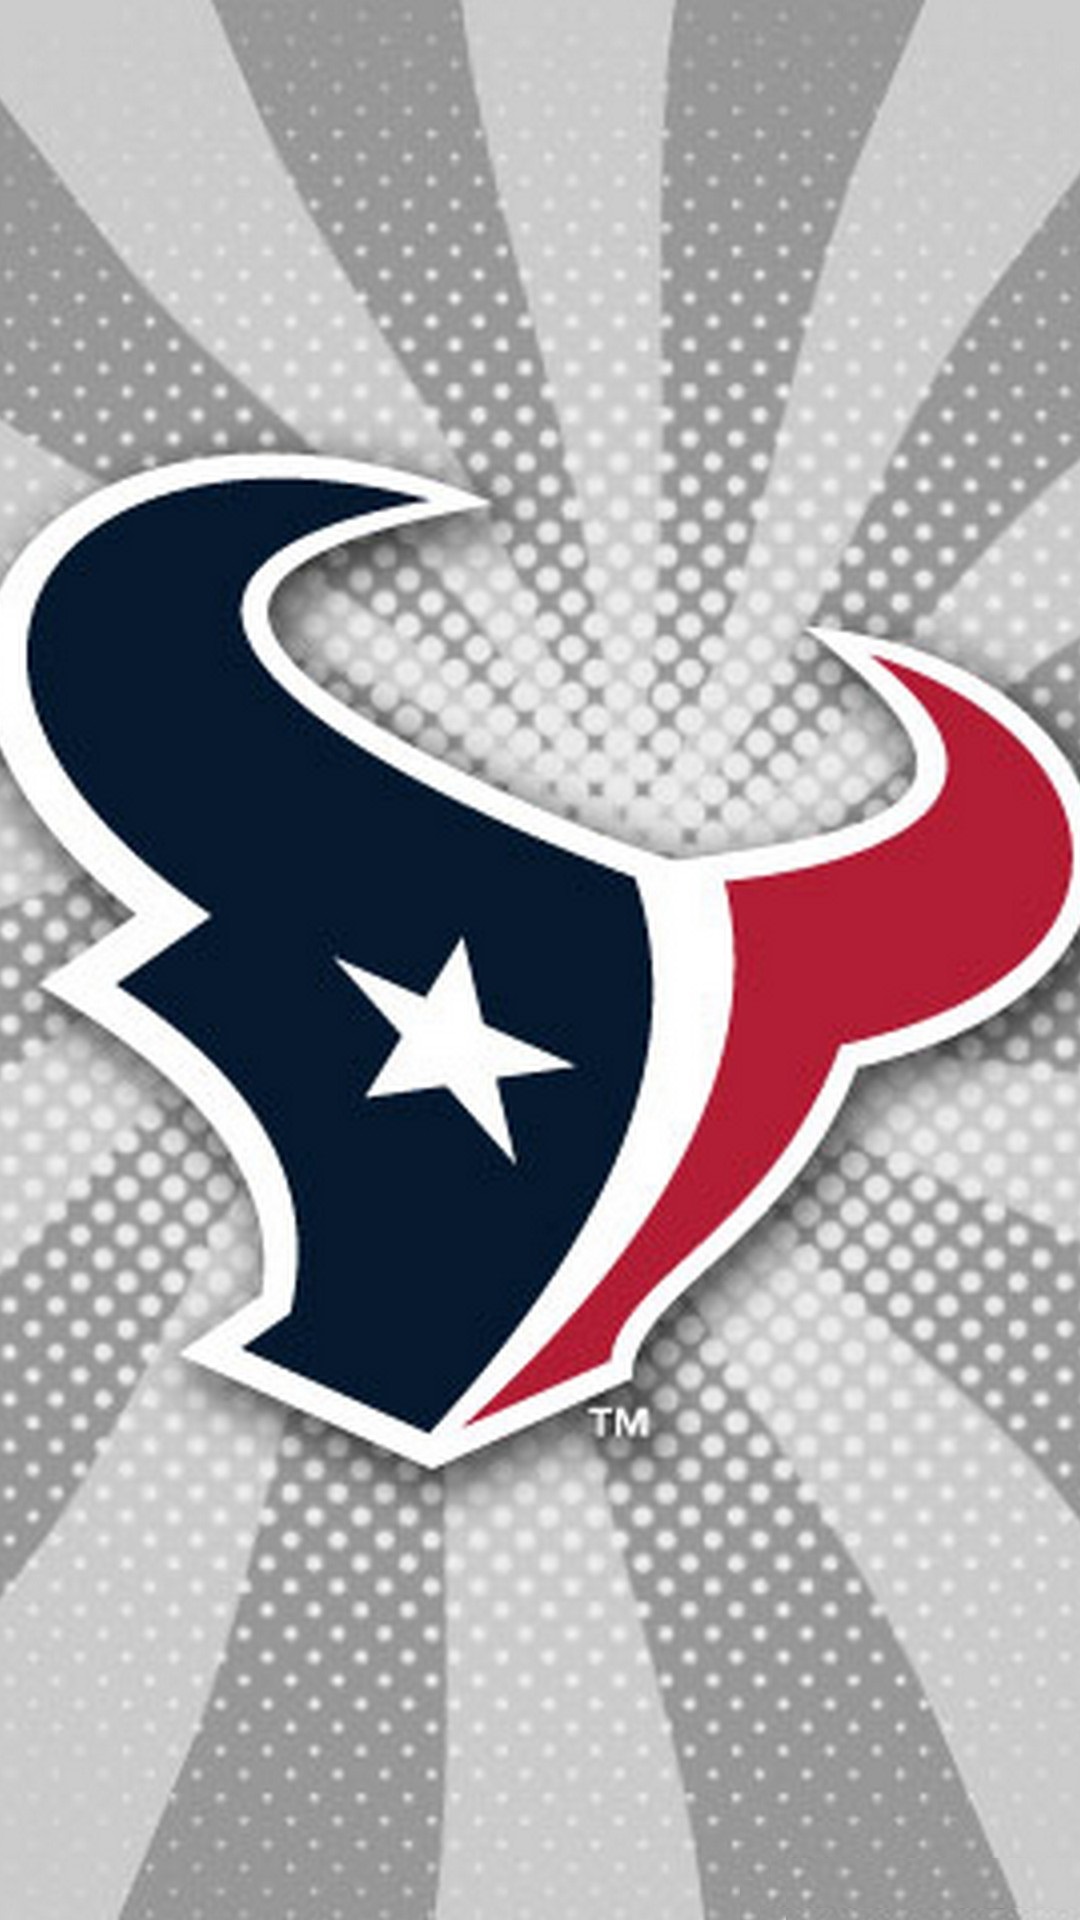 Houston Texans iPhone 7 Wallpaper with high-resolution 1080x1920 pixel. Download and set as wallpaper for Apple iPhone X, XS Max, XR, 8, 7, 6, SE, iPad, Android